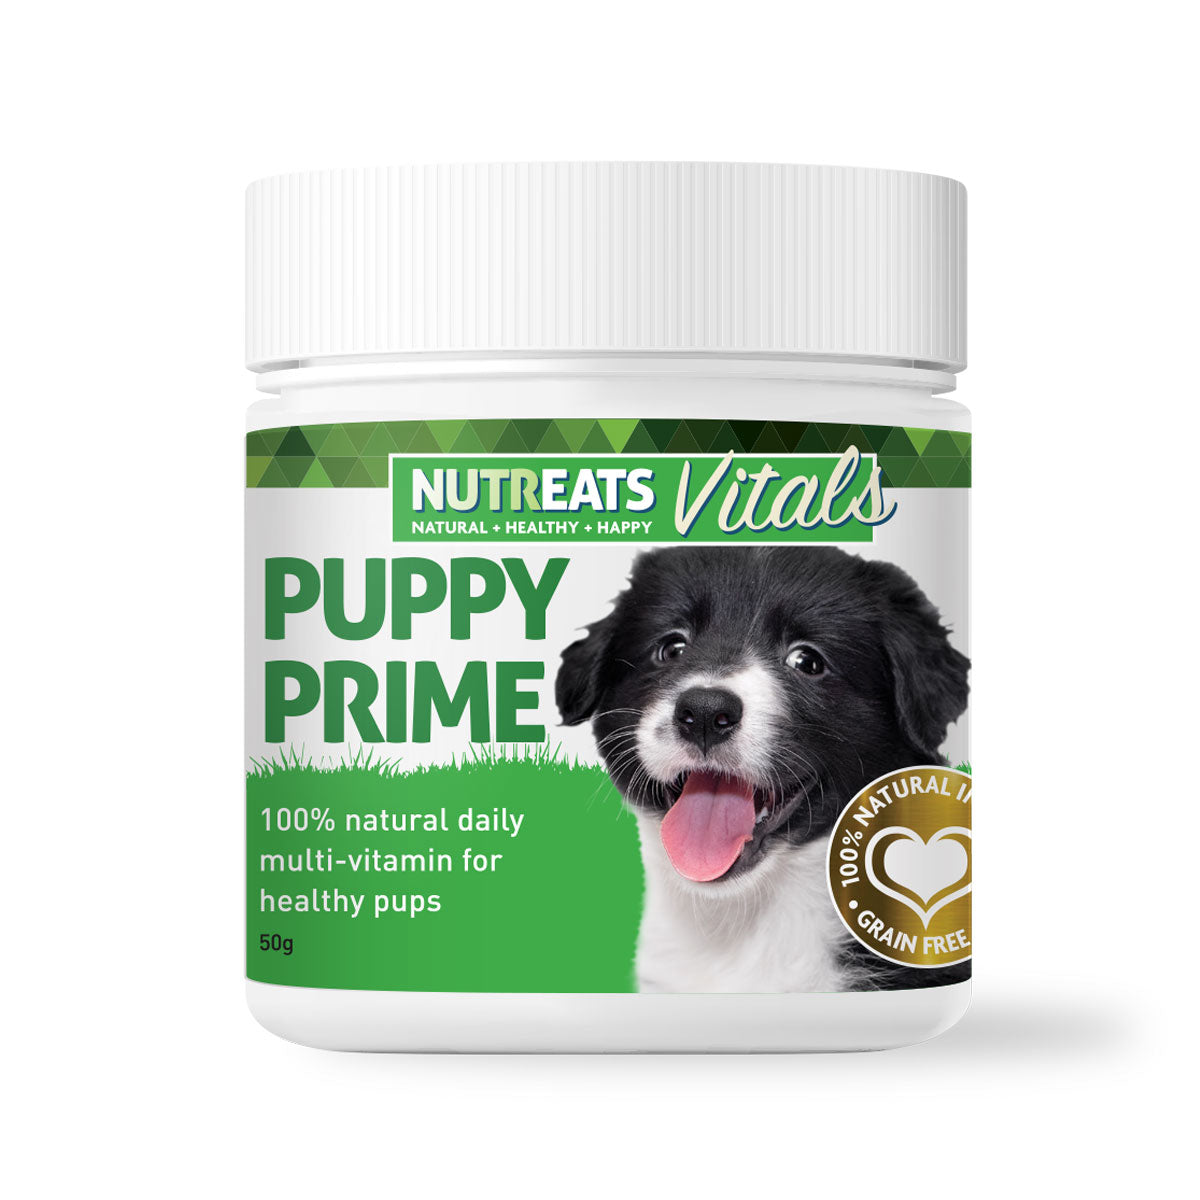 Nutreats puppy prime natural daily multivitamin supplement powder for young dogs and puppies.